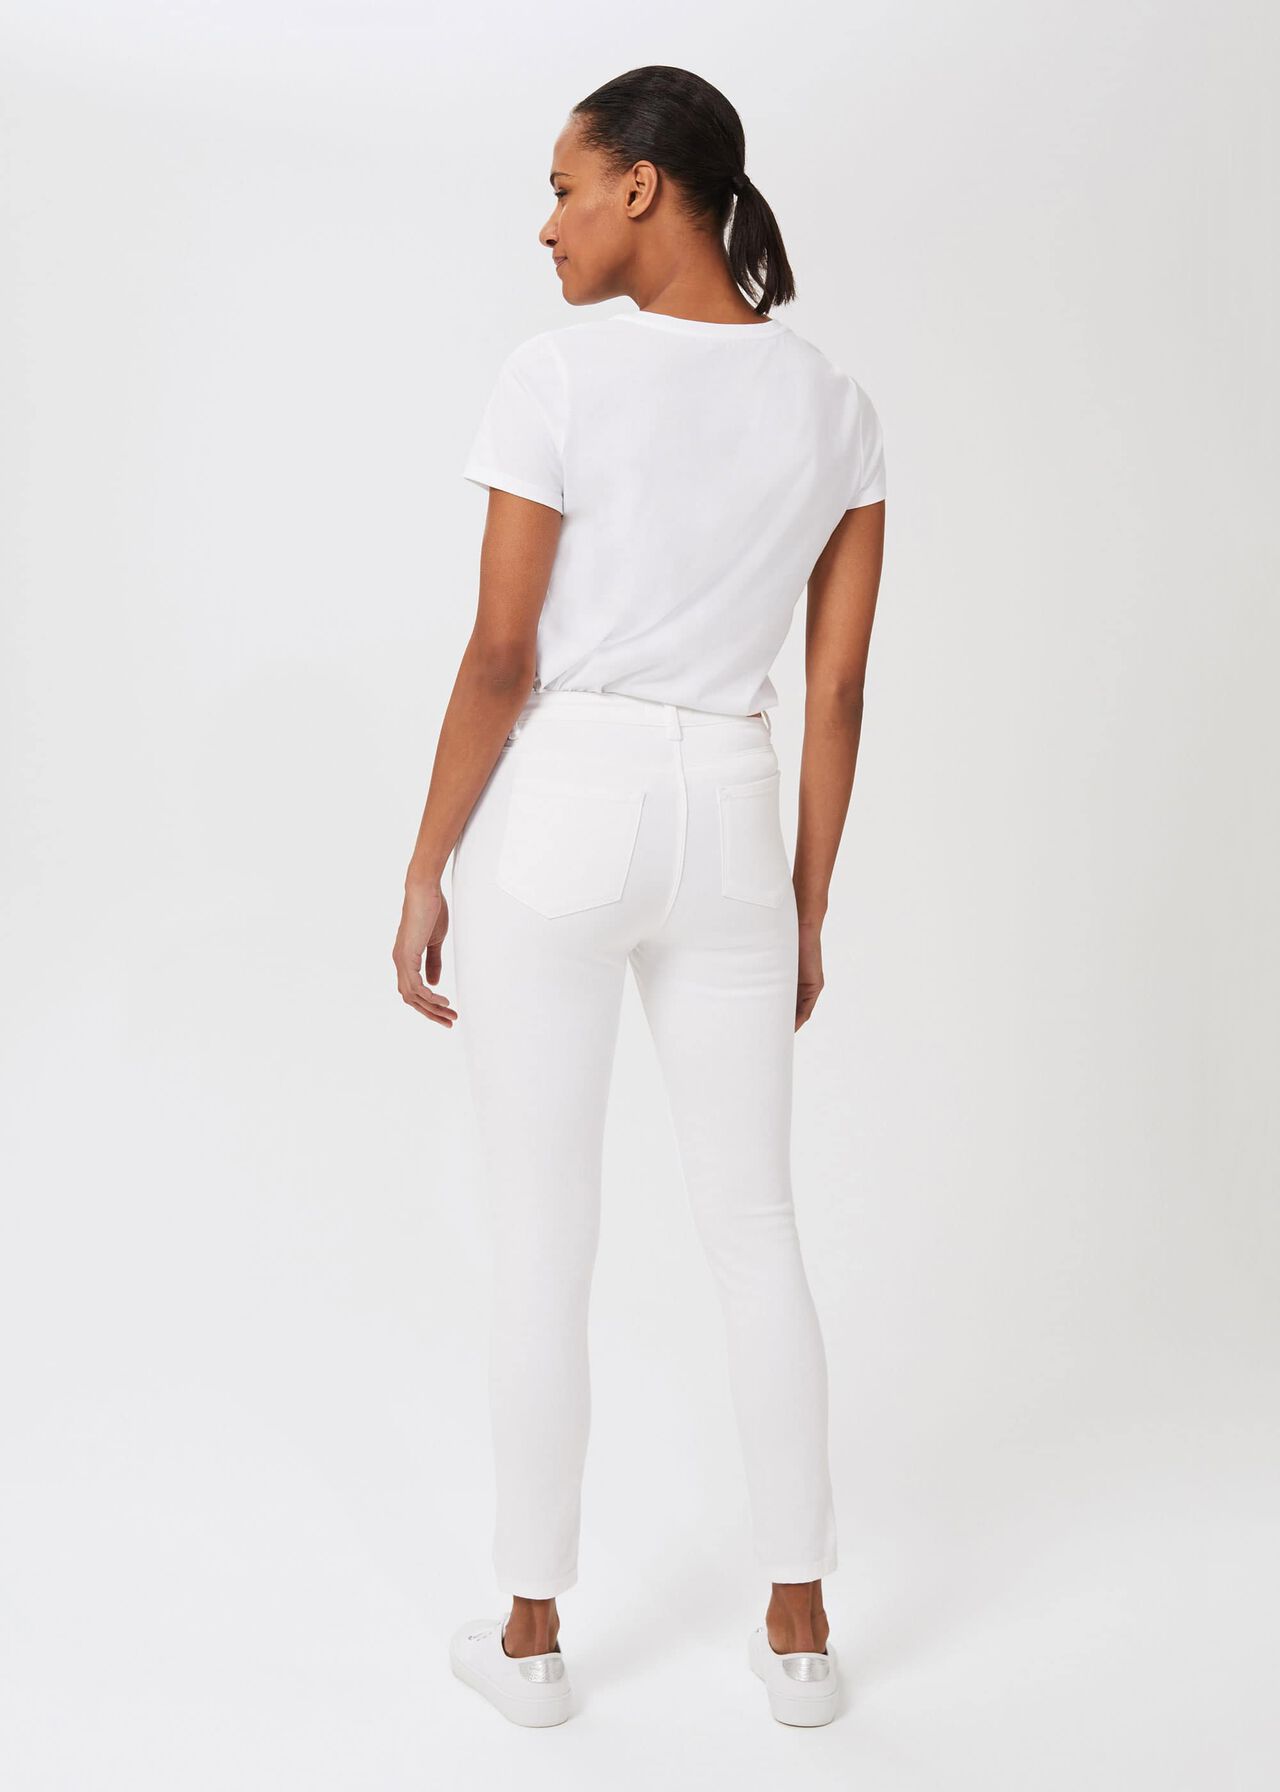 Marianne Denim 7/8 Jeans With Stretch, White, hi-res